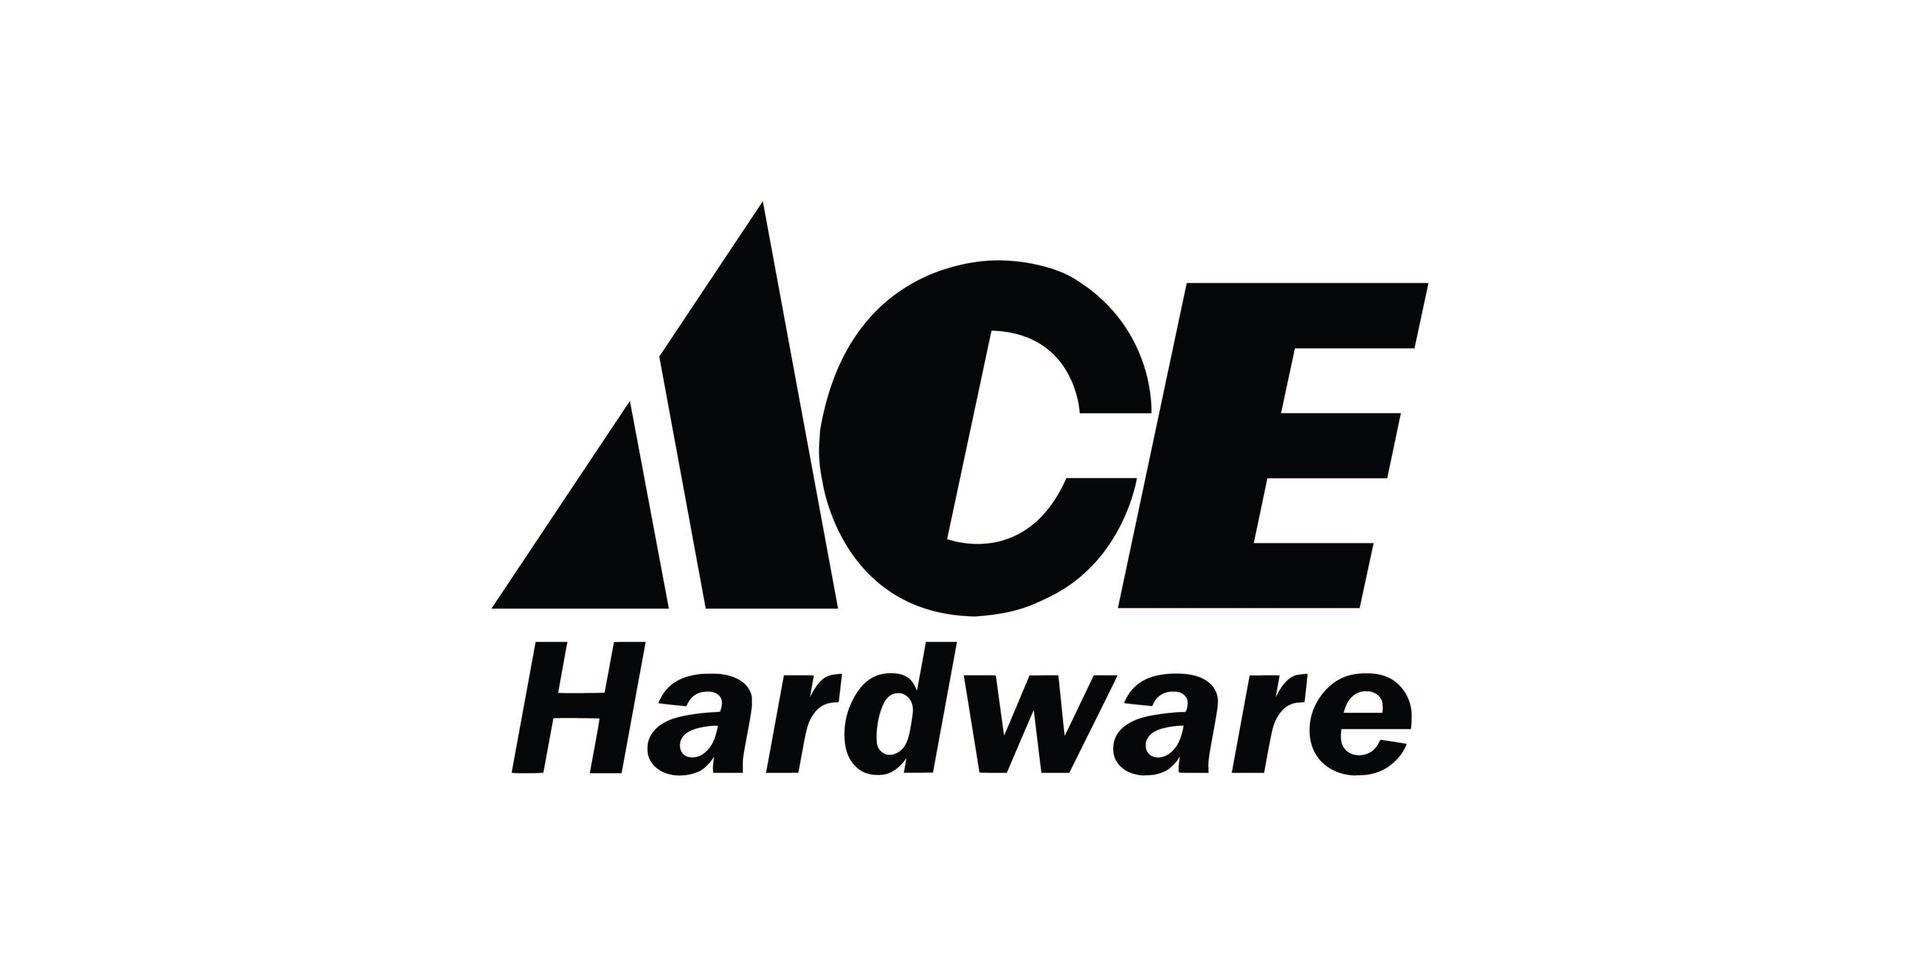 The ace hardware logo is black and white on a white background.